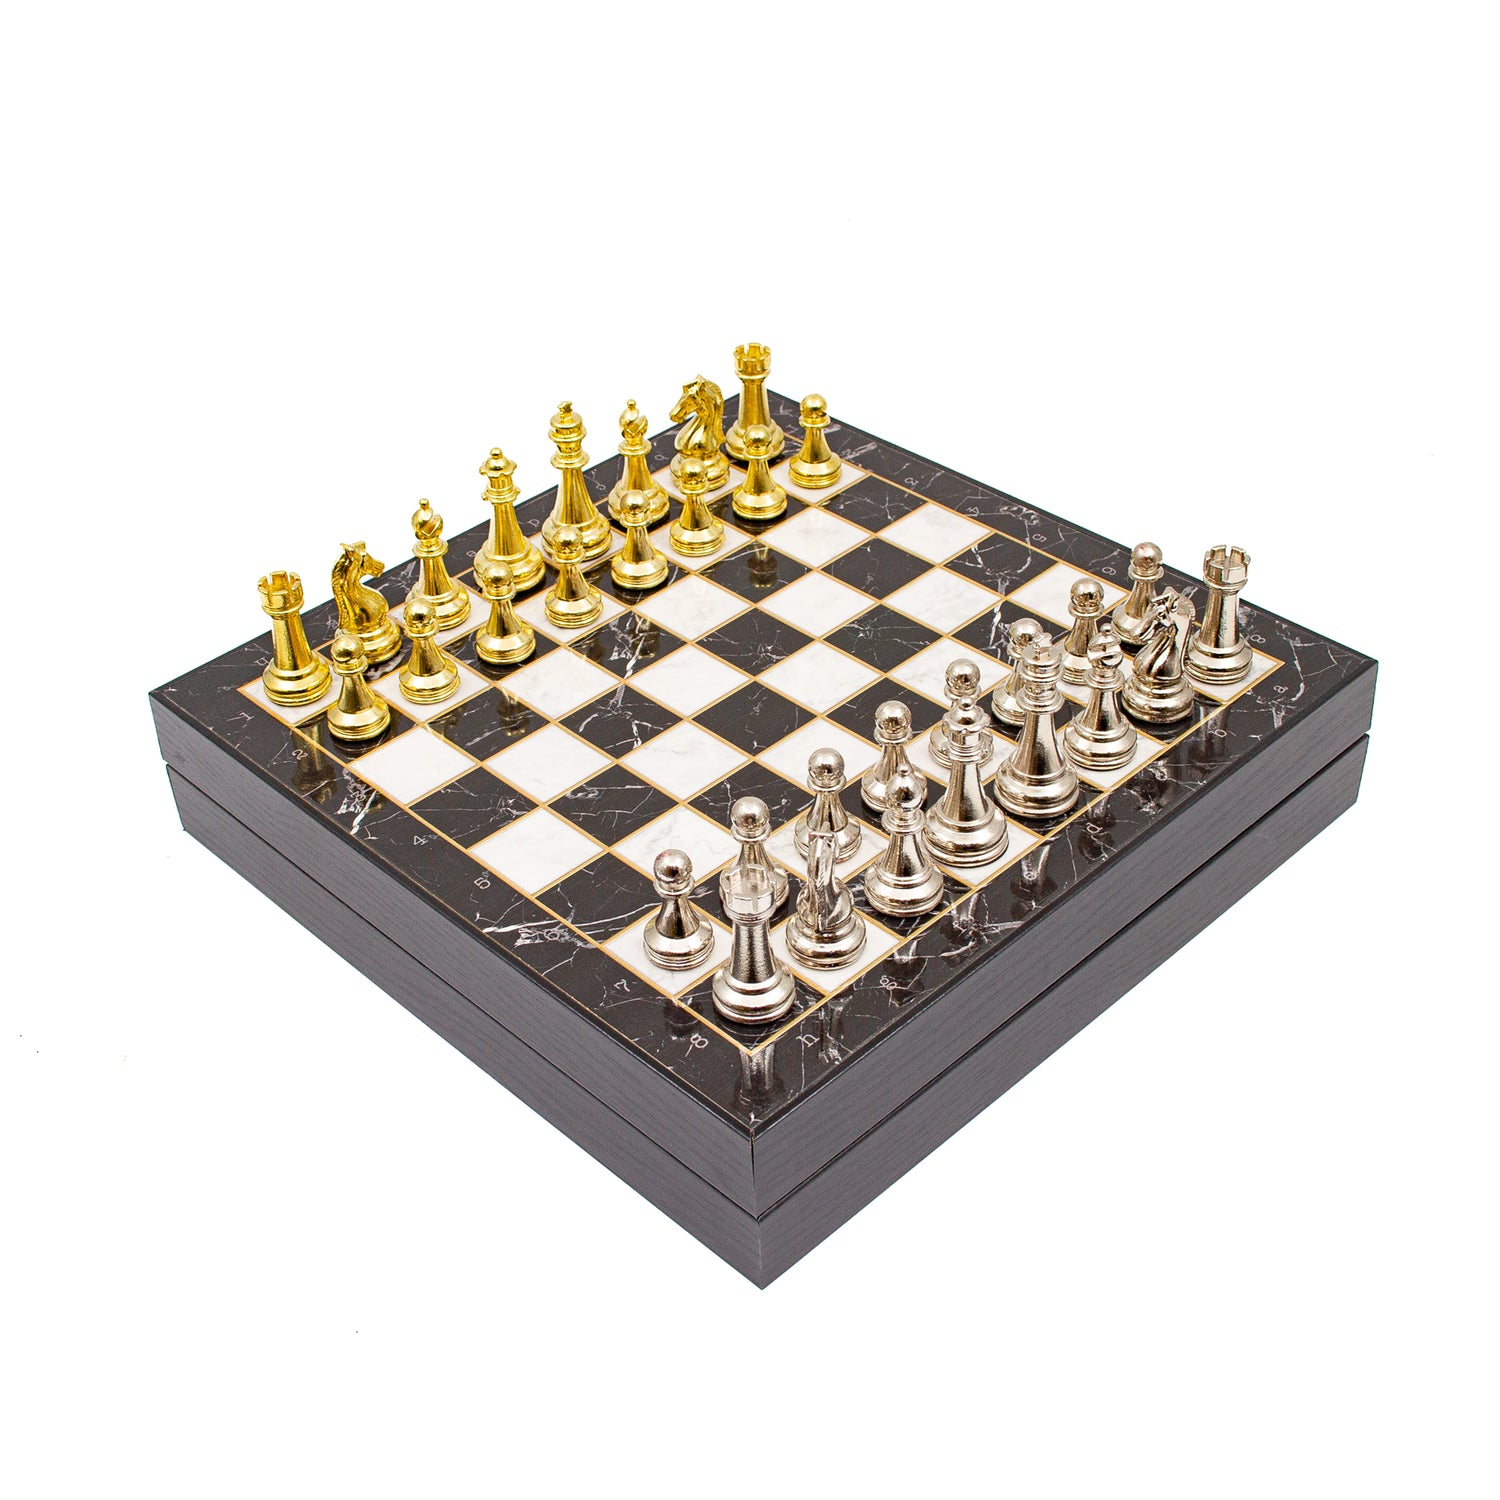 Marble-Patterned Chess: Unique with Elegant Pieces - Ketohandcraft